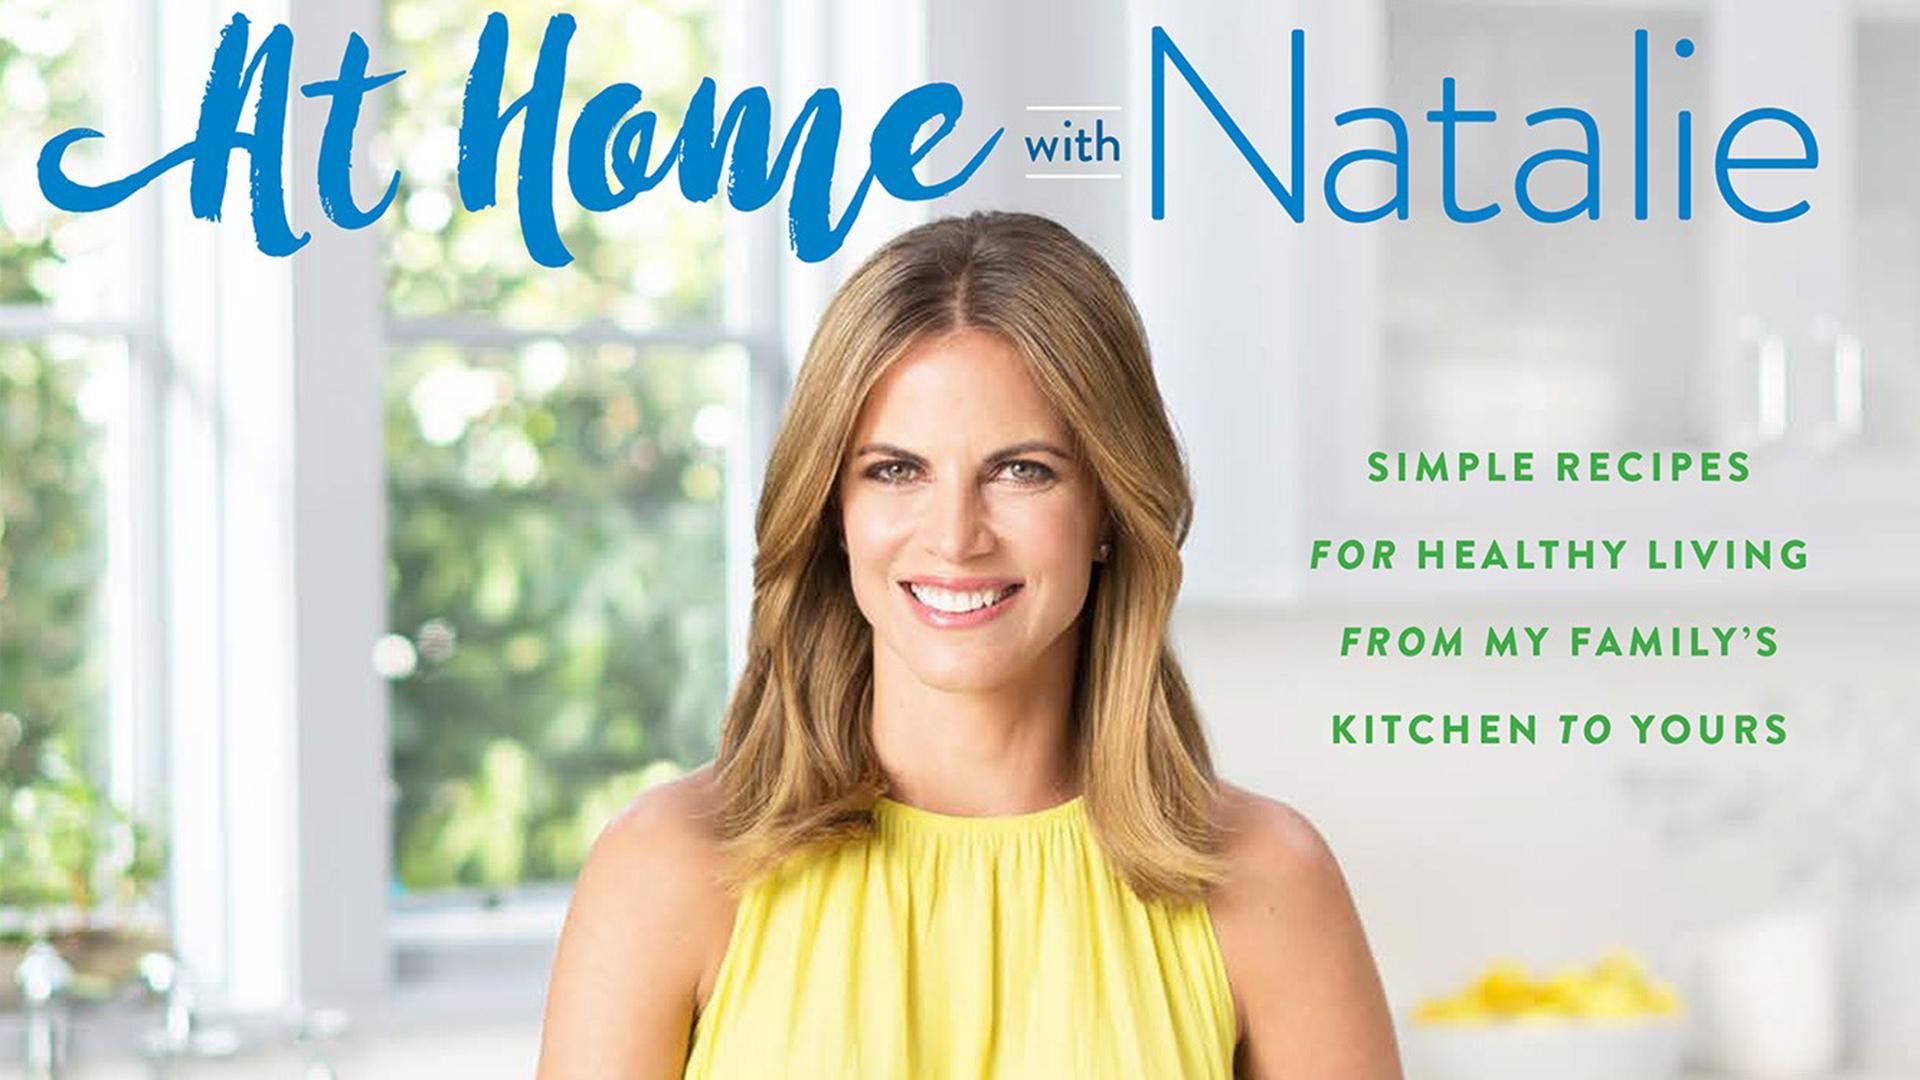 Natalie Morales' cookbook family recipes with a global twist